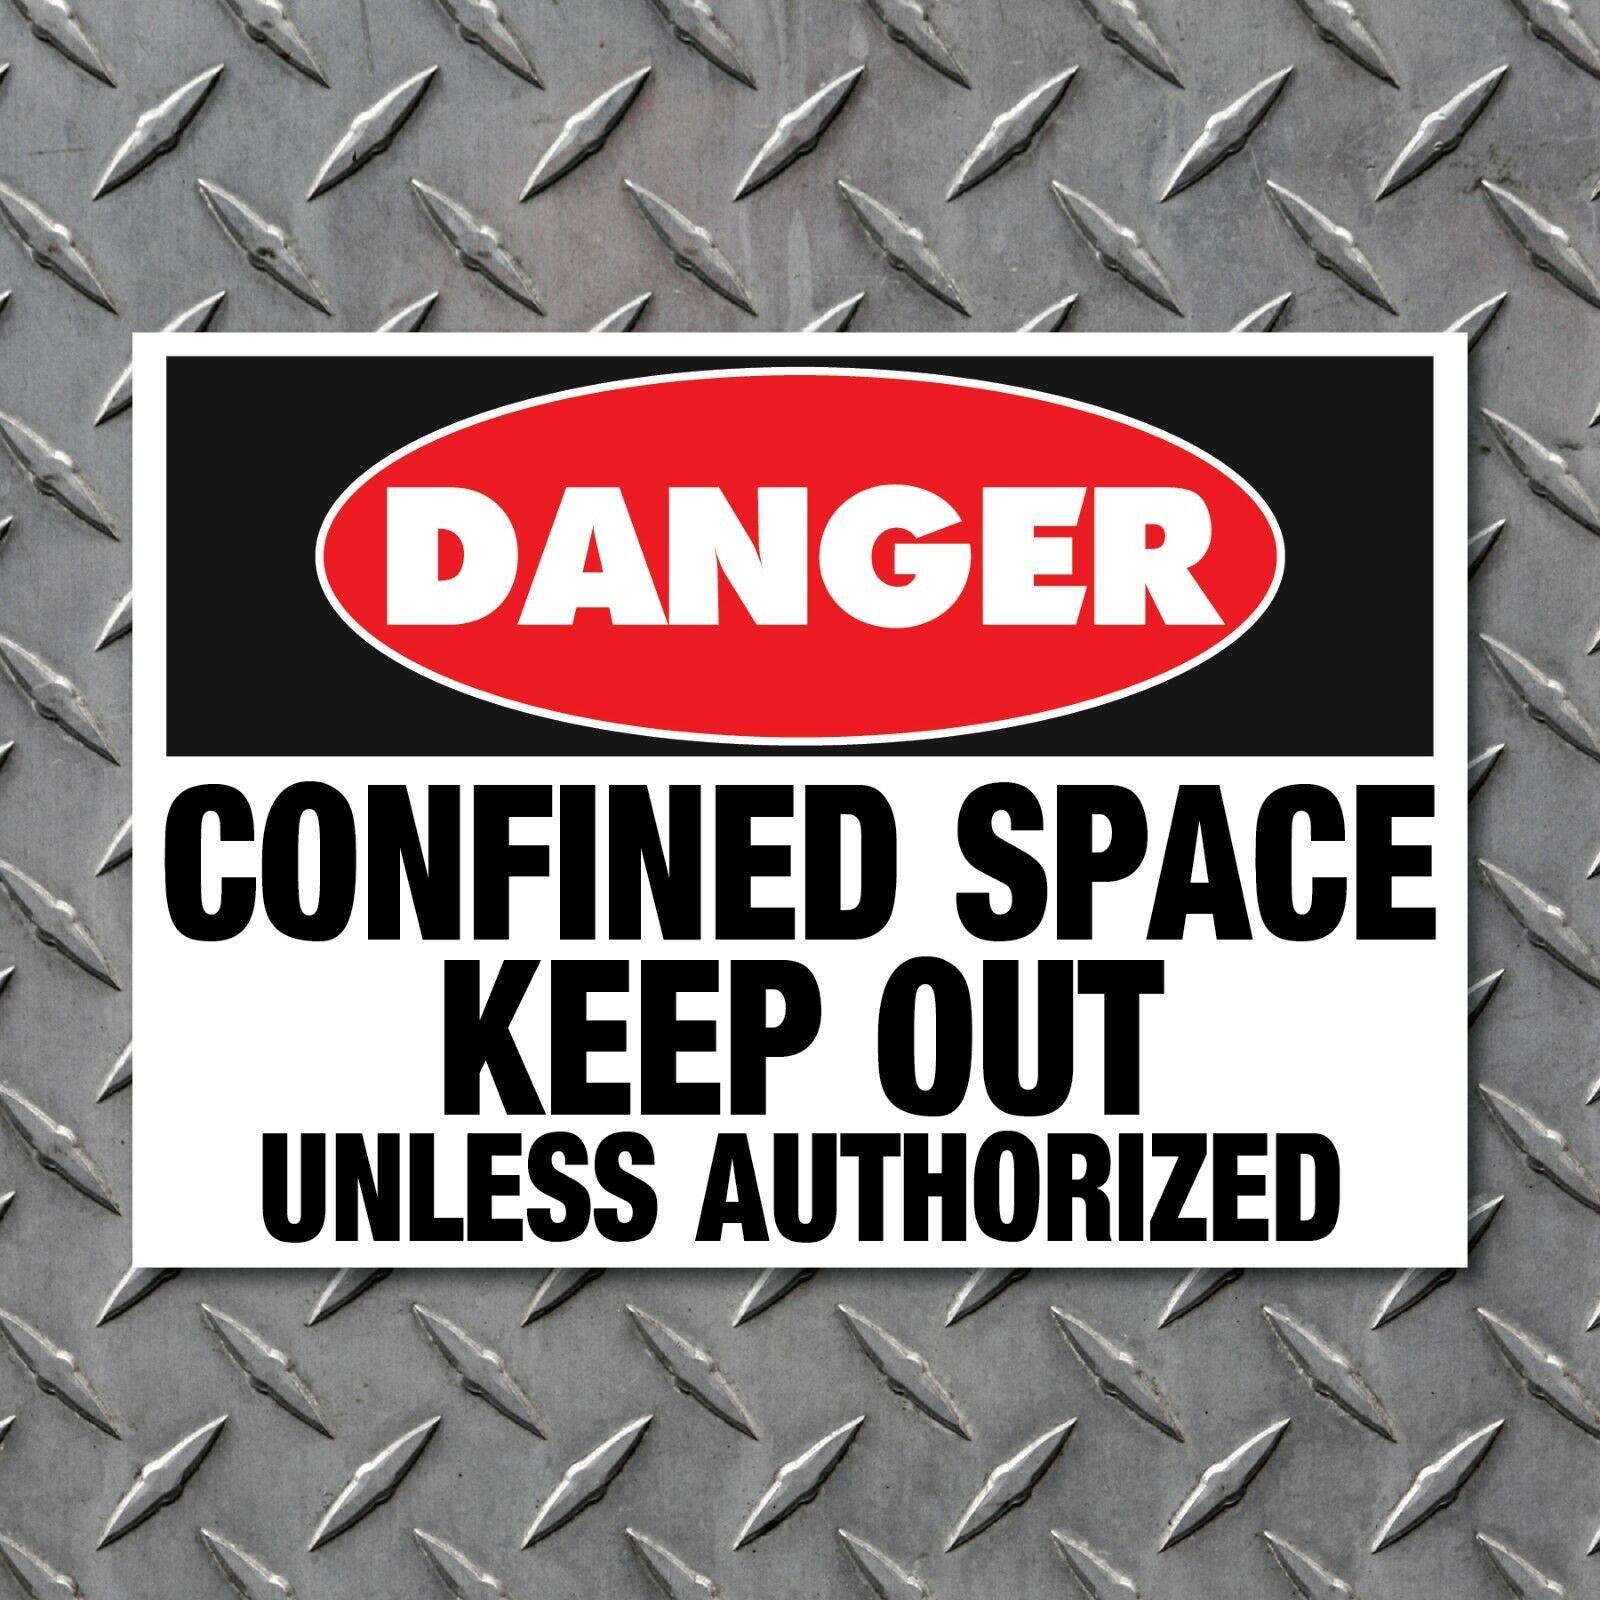 Danger Confined Space Keep Out  Vinyl Sticker Bumper Decal - $2.48 - $8.91